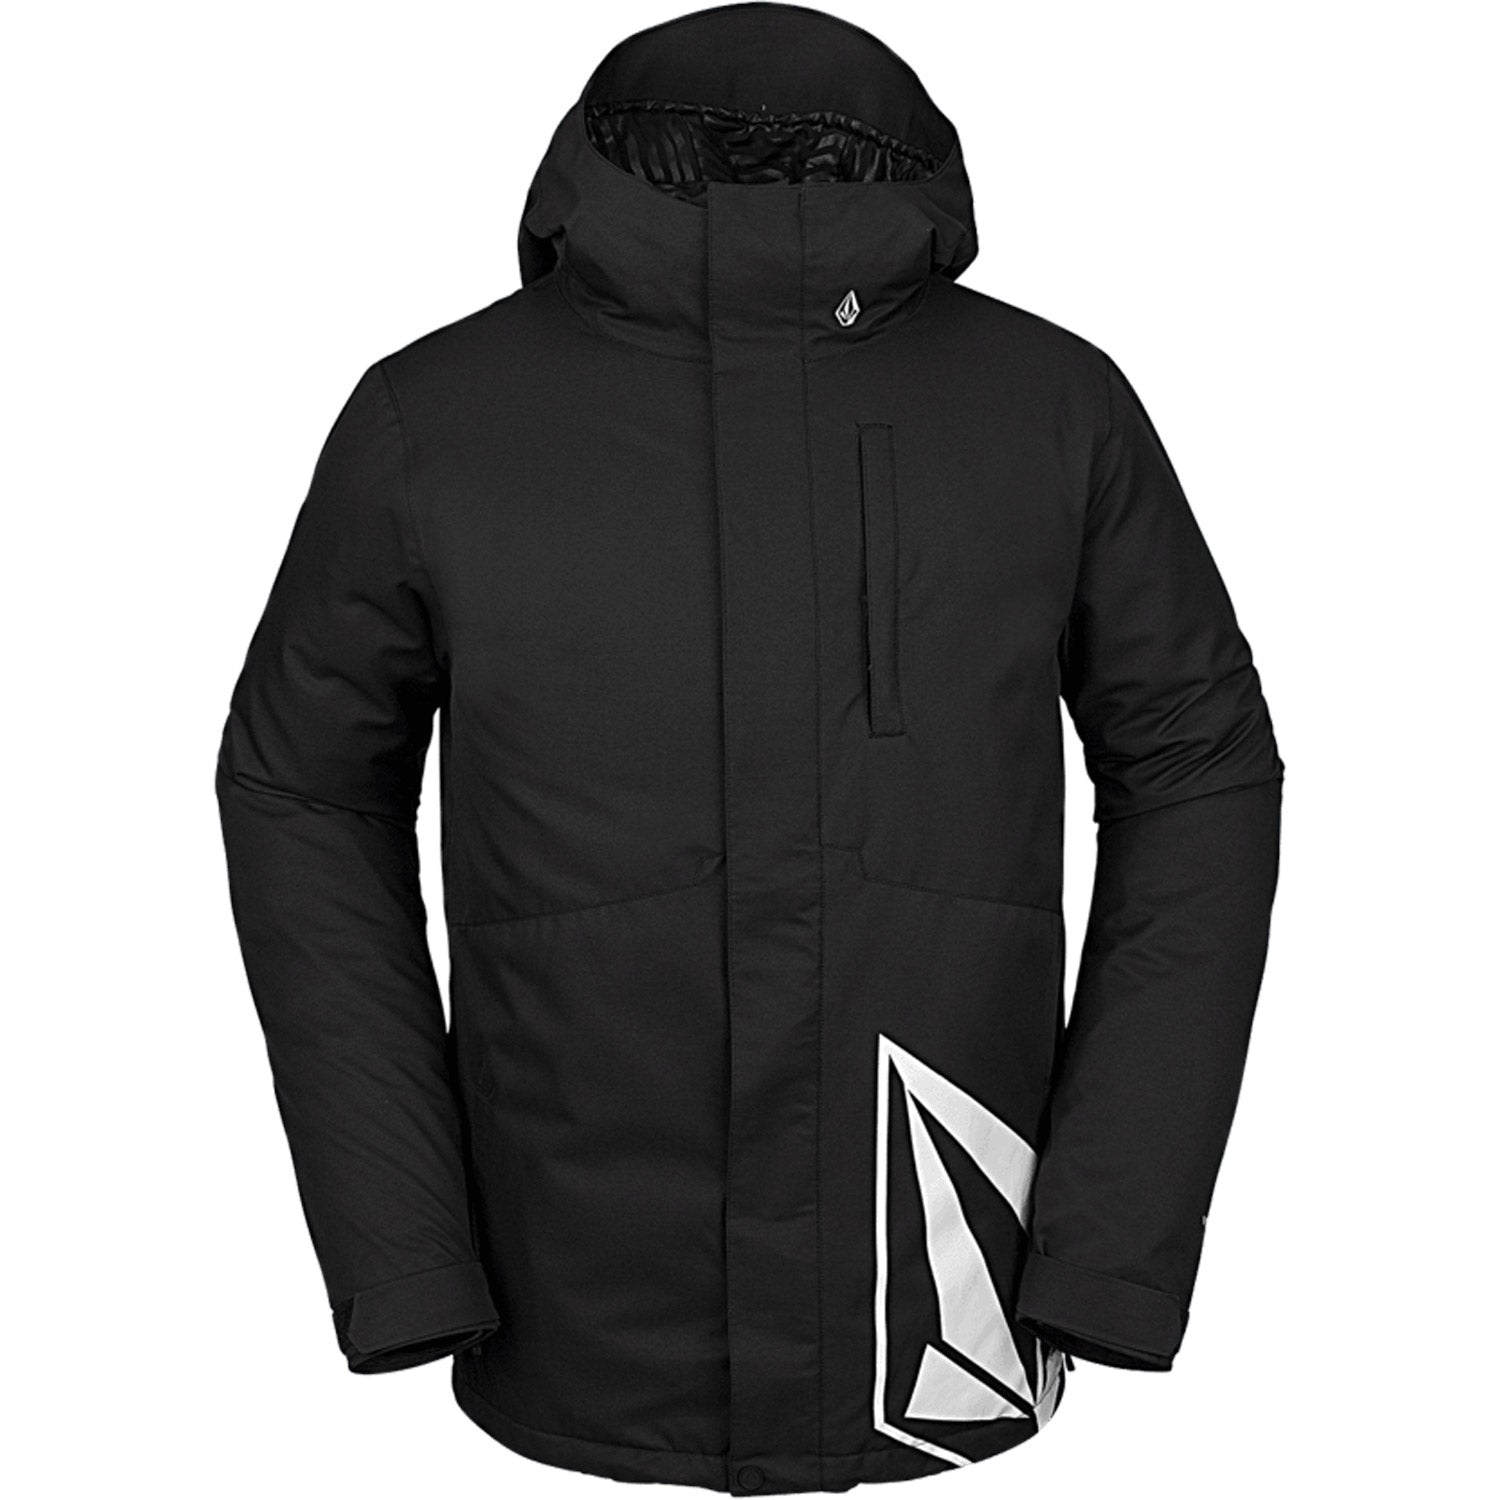 17Forty Snowboard Jacket 2021